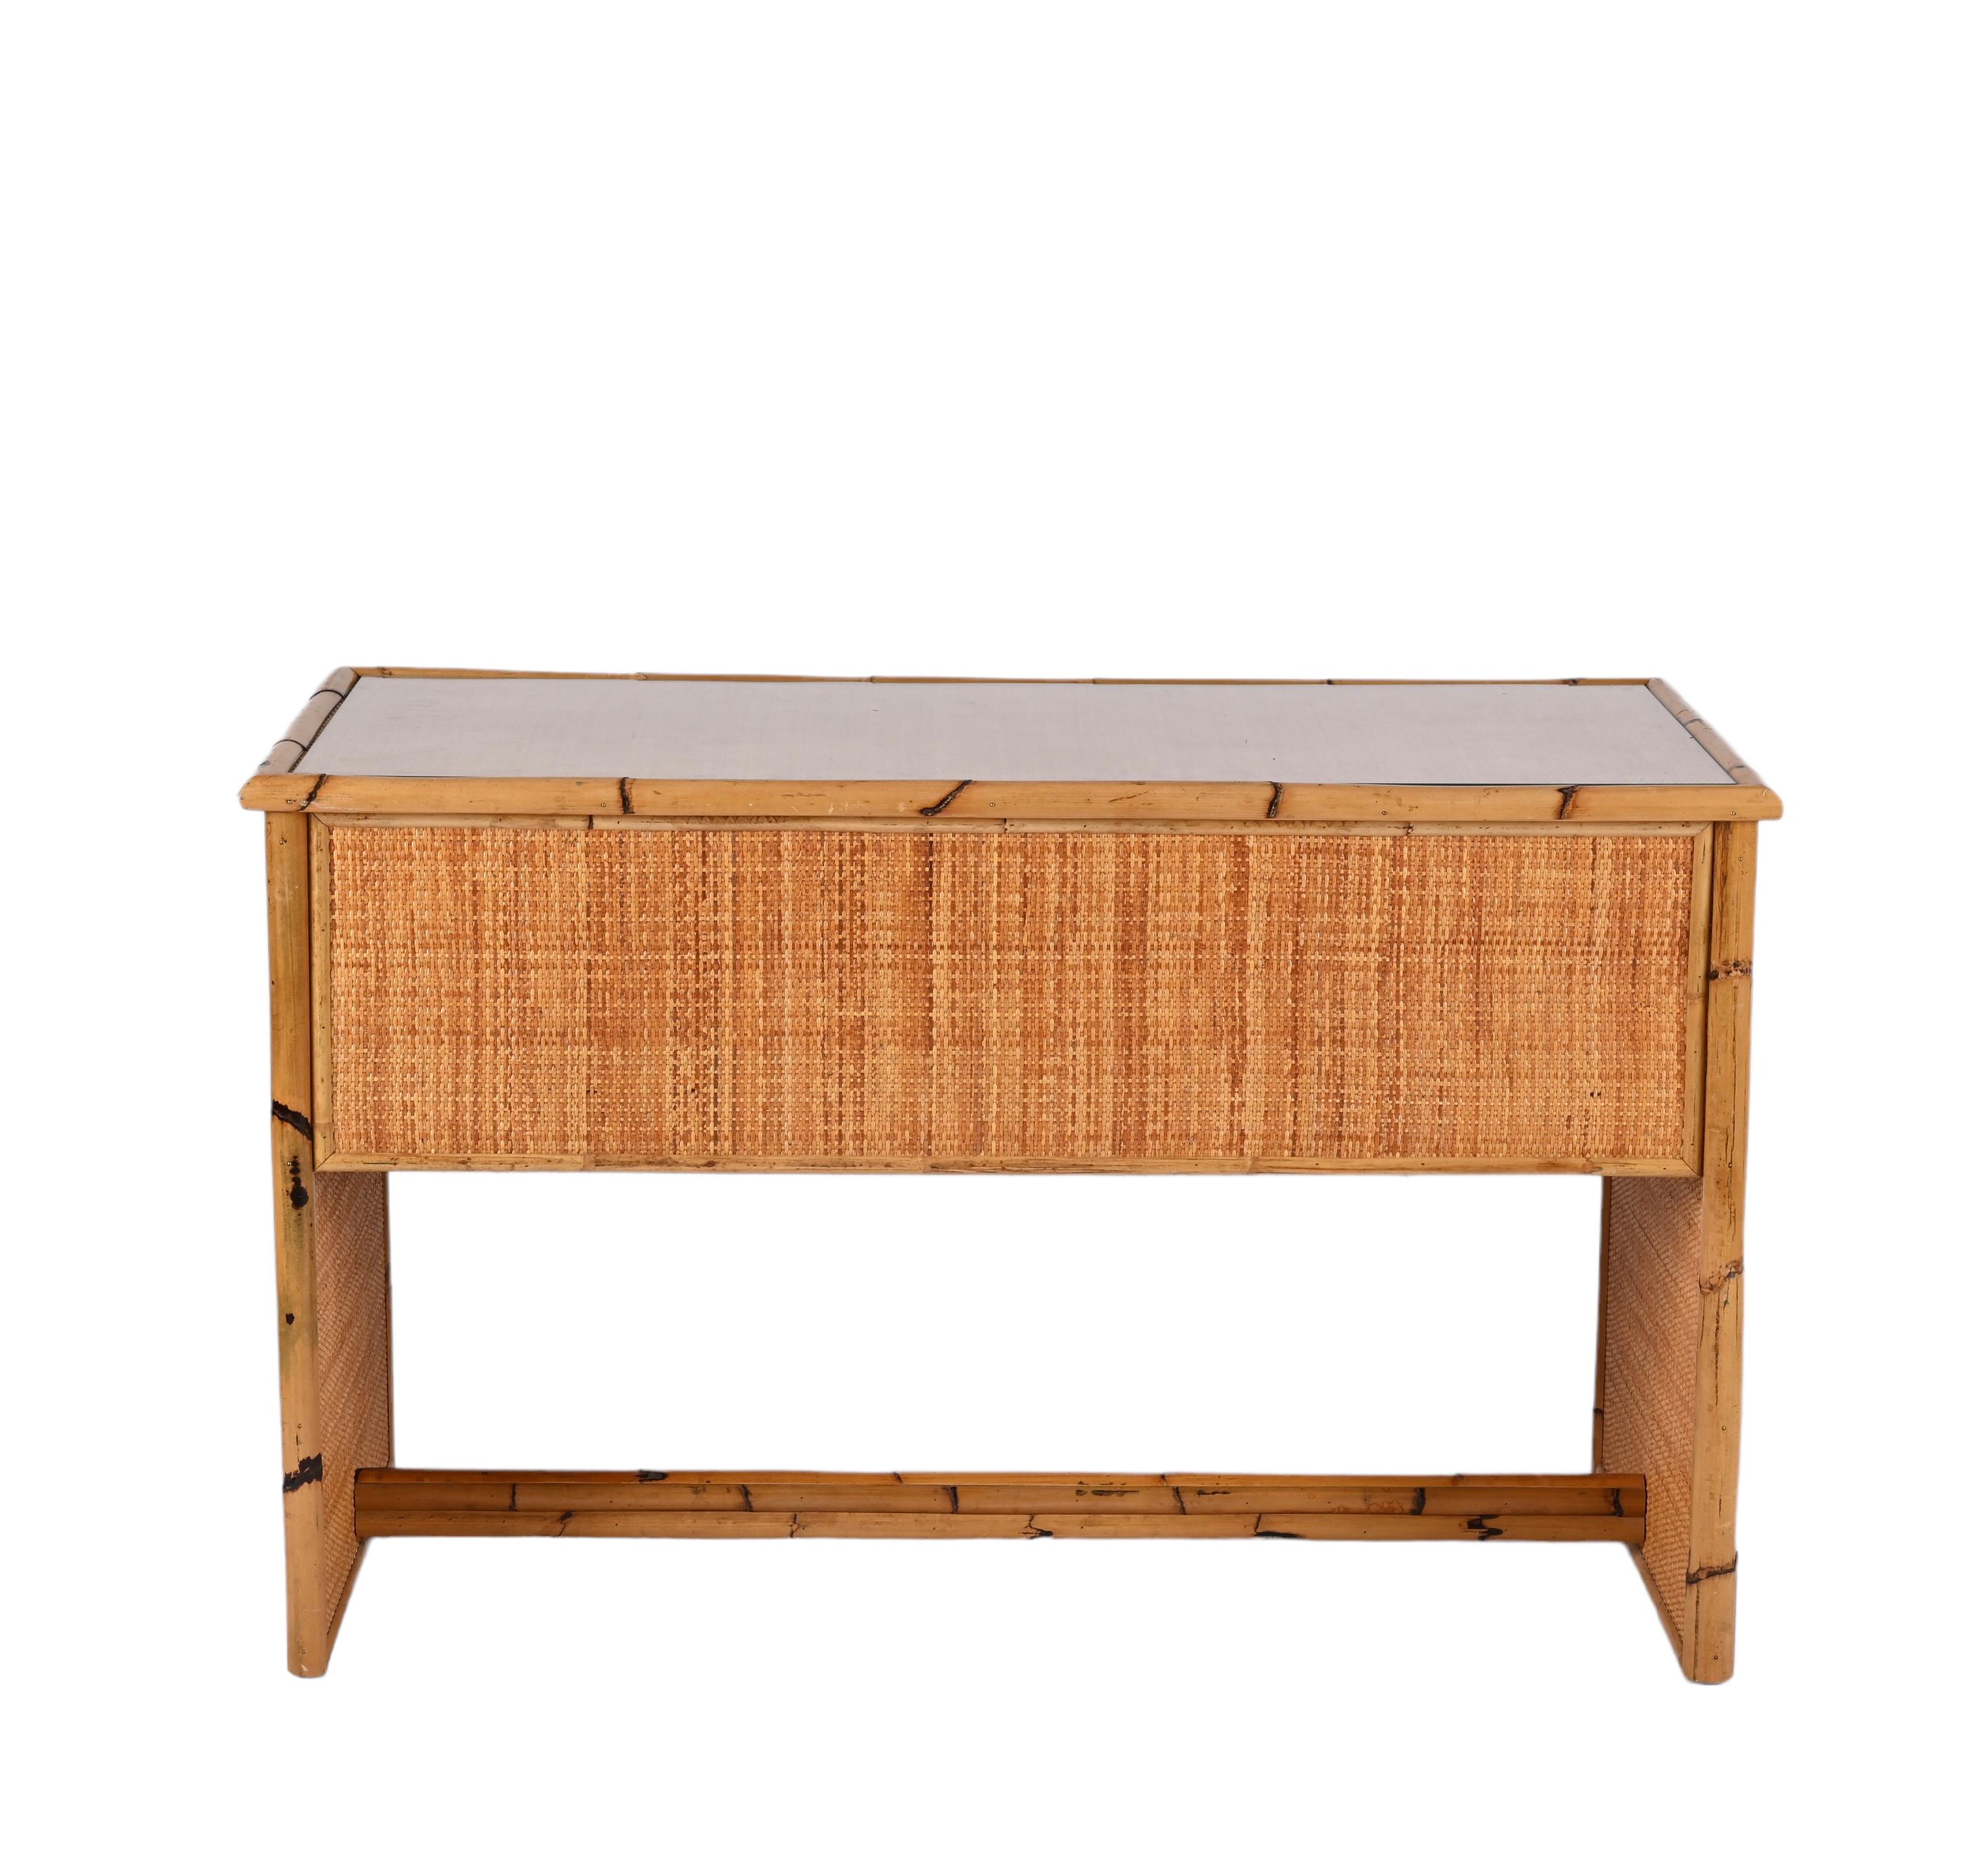 Midcentury Glass Top, Bamboo and Wicker Italian Desk with Drawers, 1980s For Sale 2